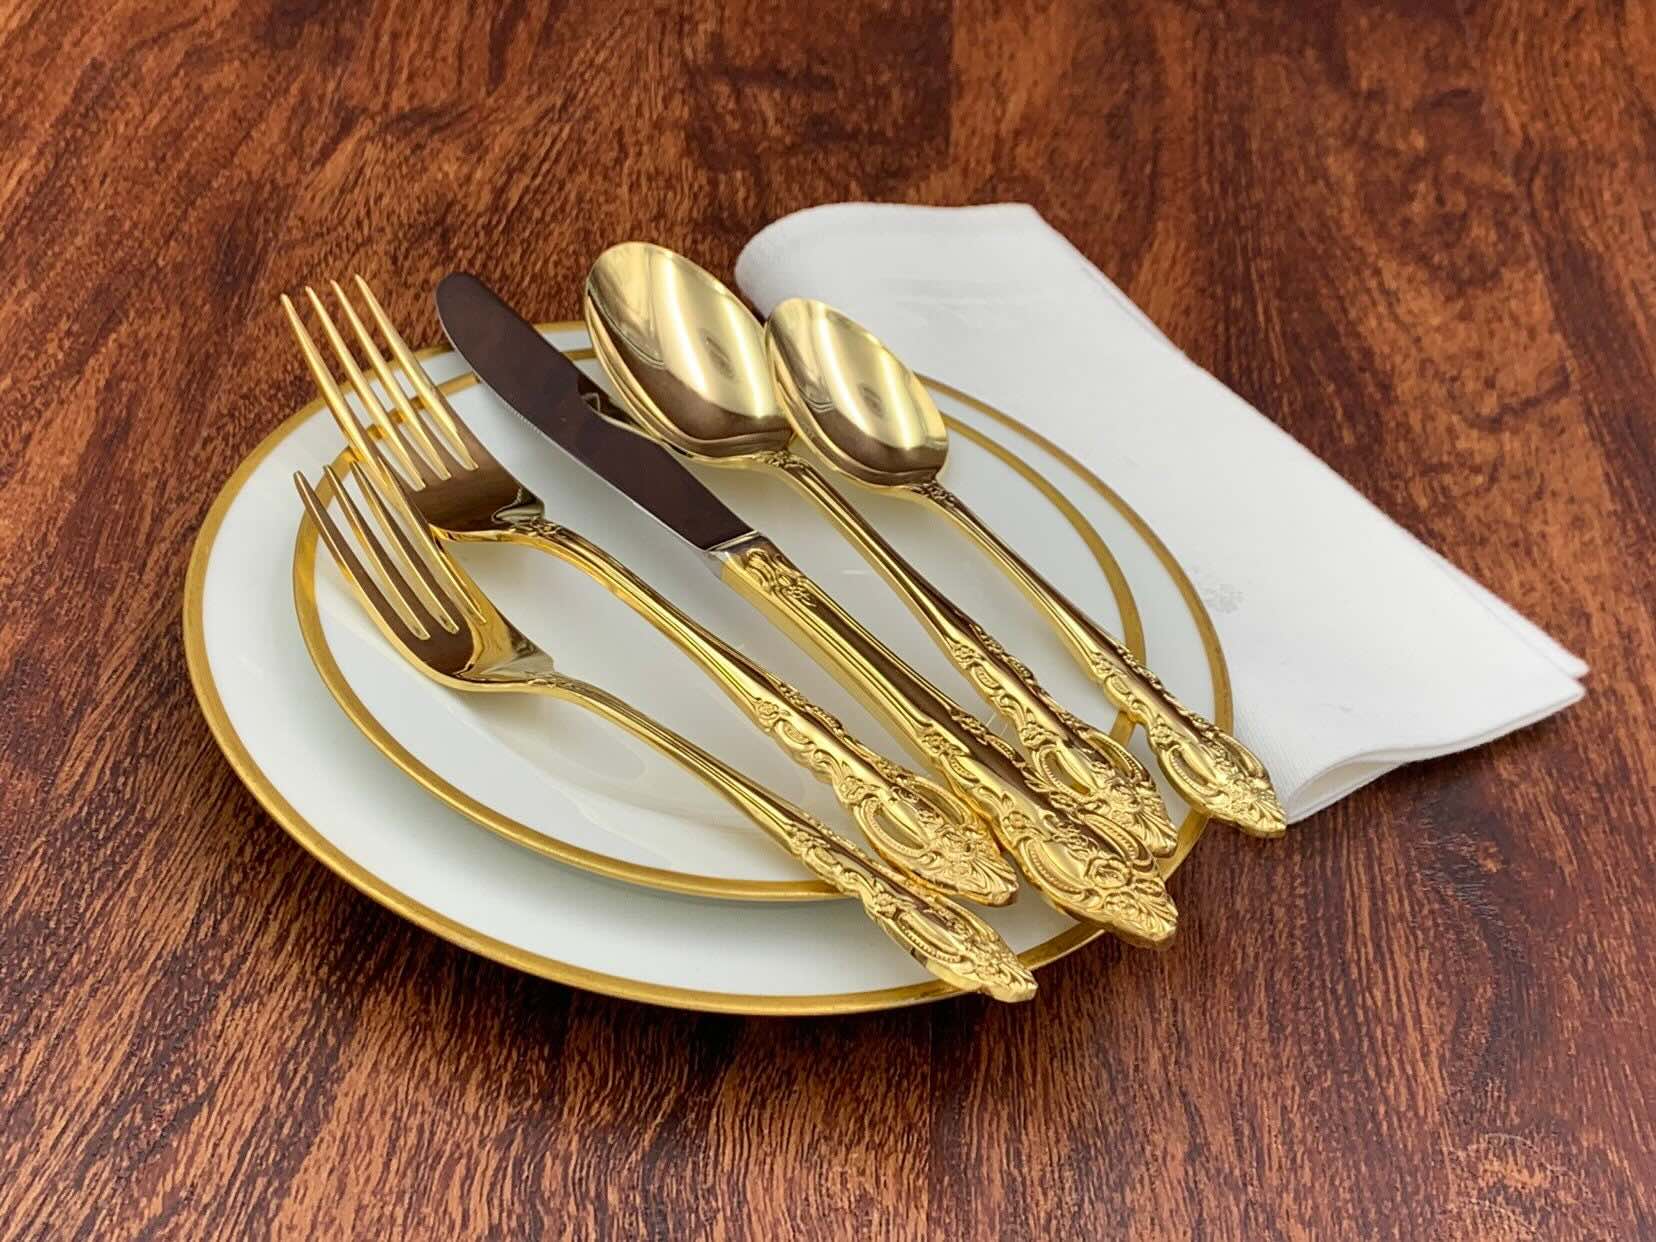 How To Clean Gold-Plated Silverware